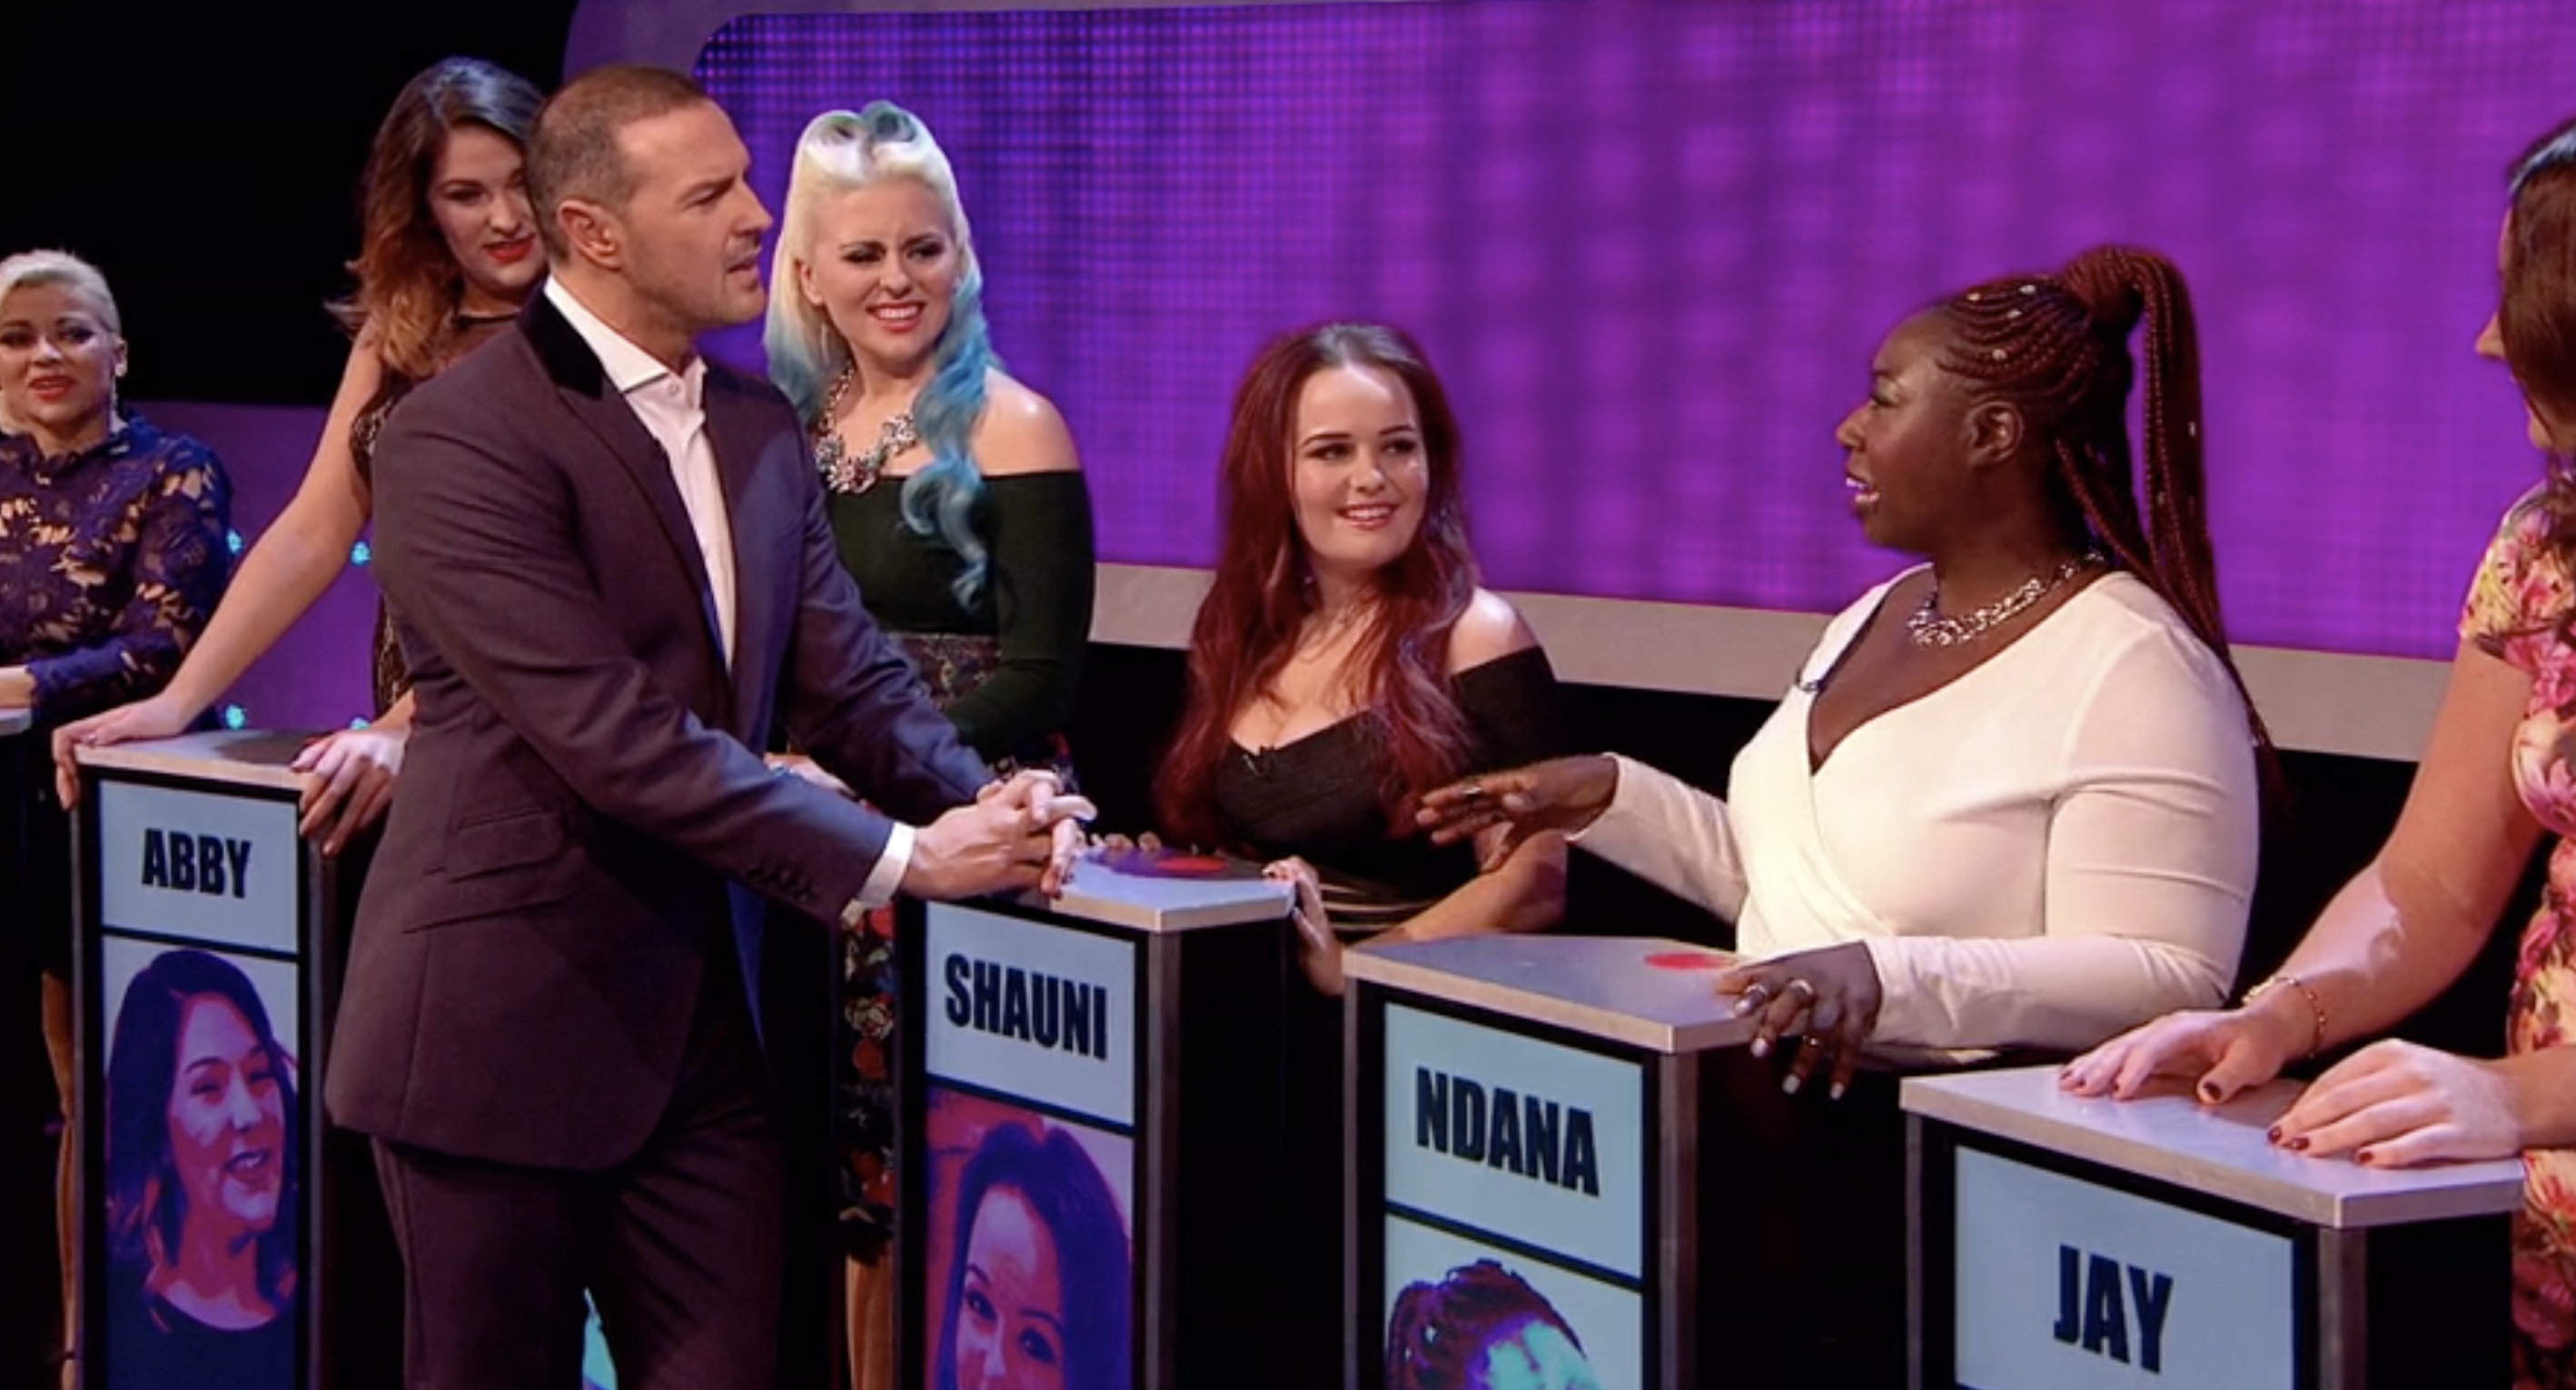 Take Me Out series 11: How to watch and apply for the ITV dating show!